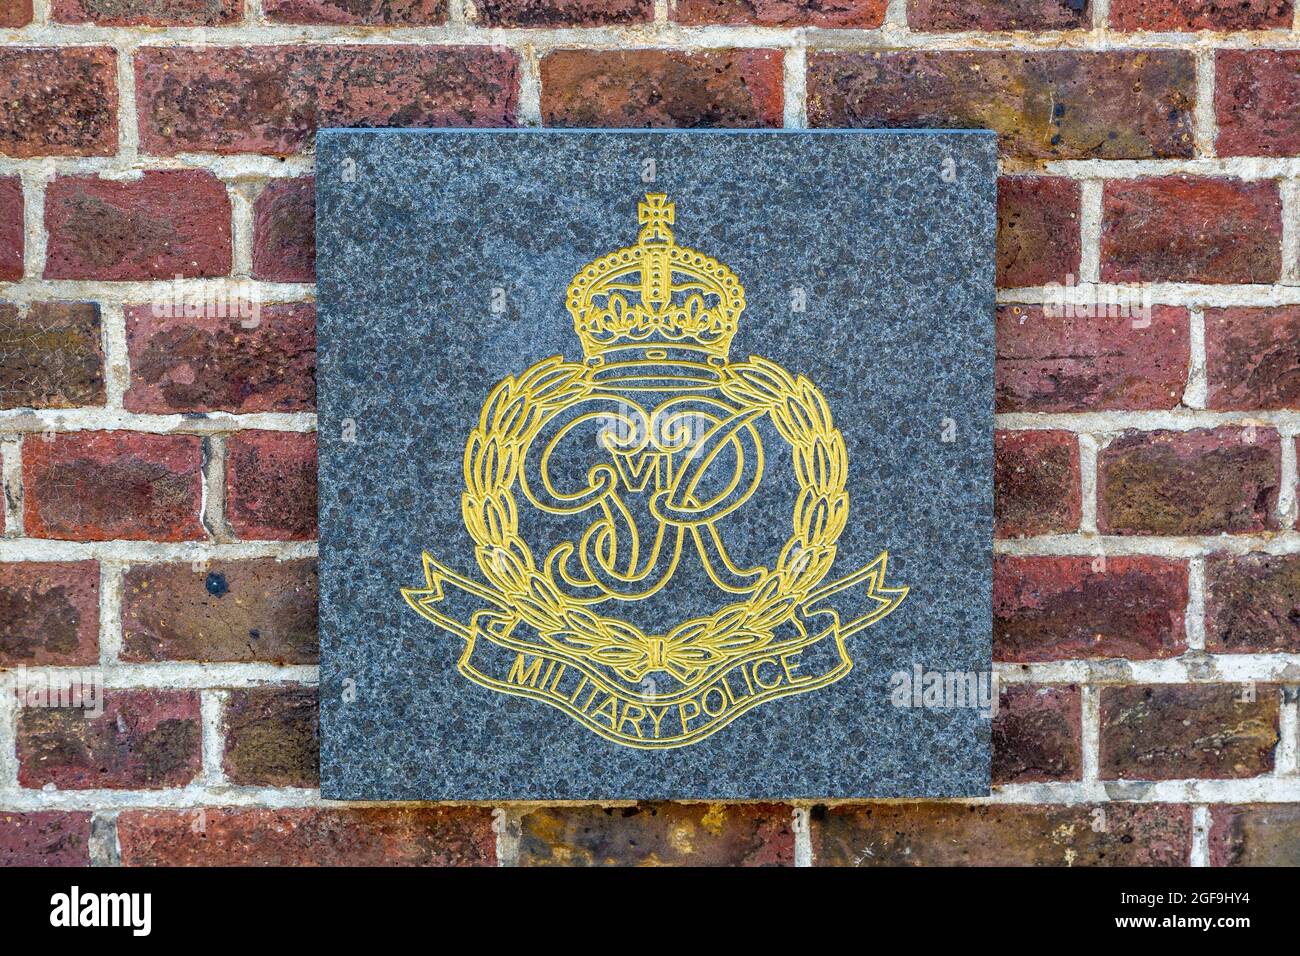 08-24-2021 Portsmouth, Hampshire, UK, The Emblem or crest of the Military police regiment with the george the sixth badge used during world war two Stock Photo